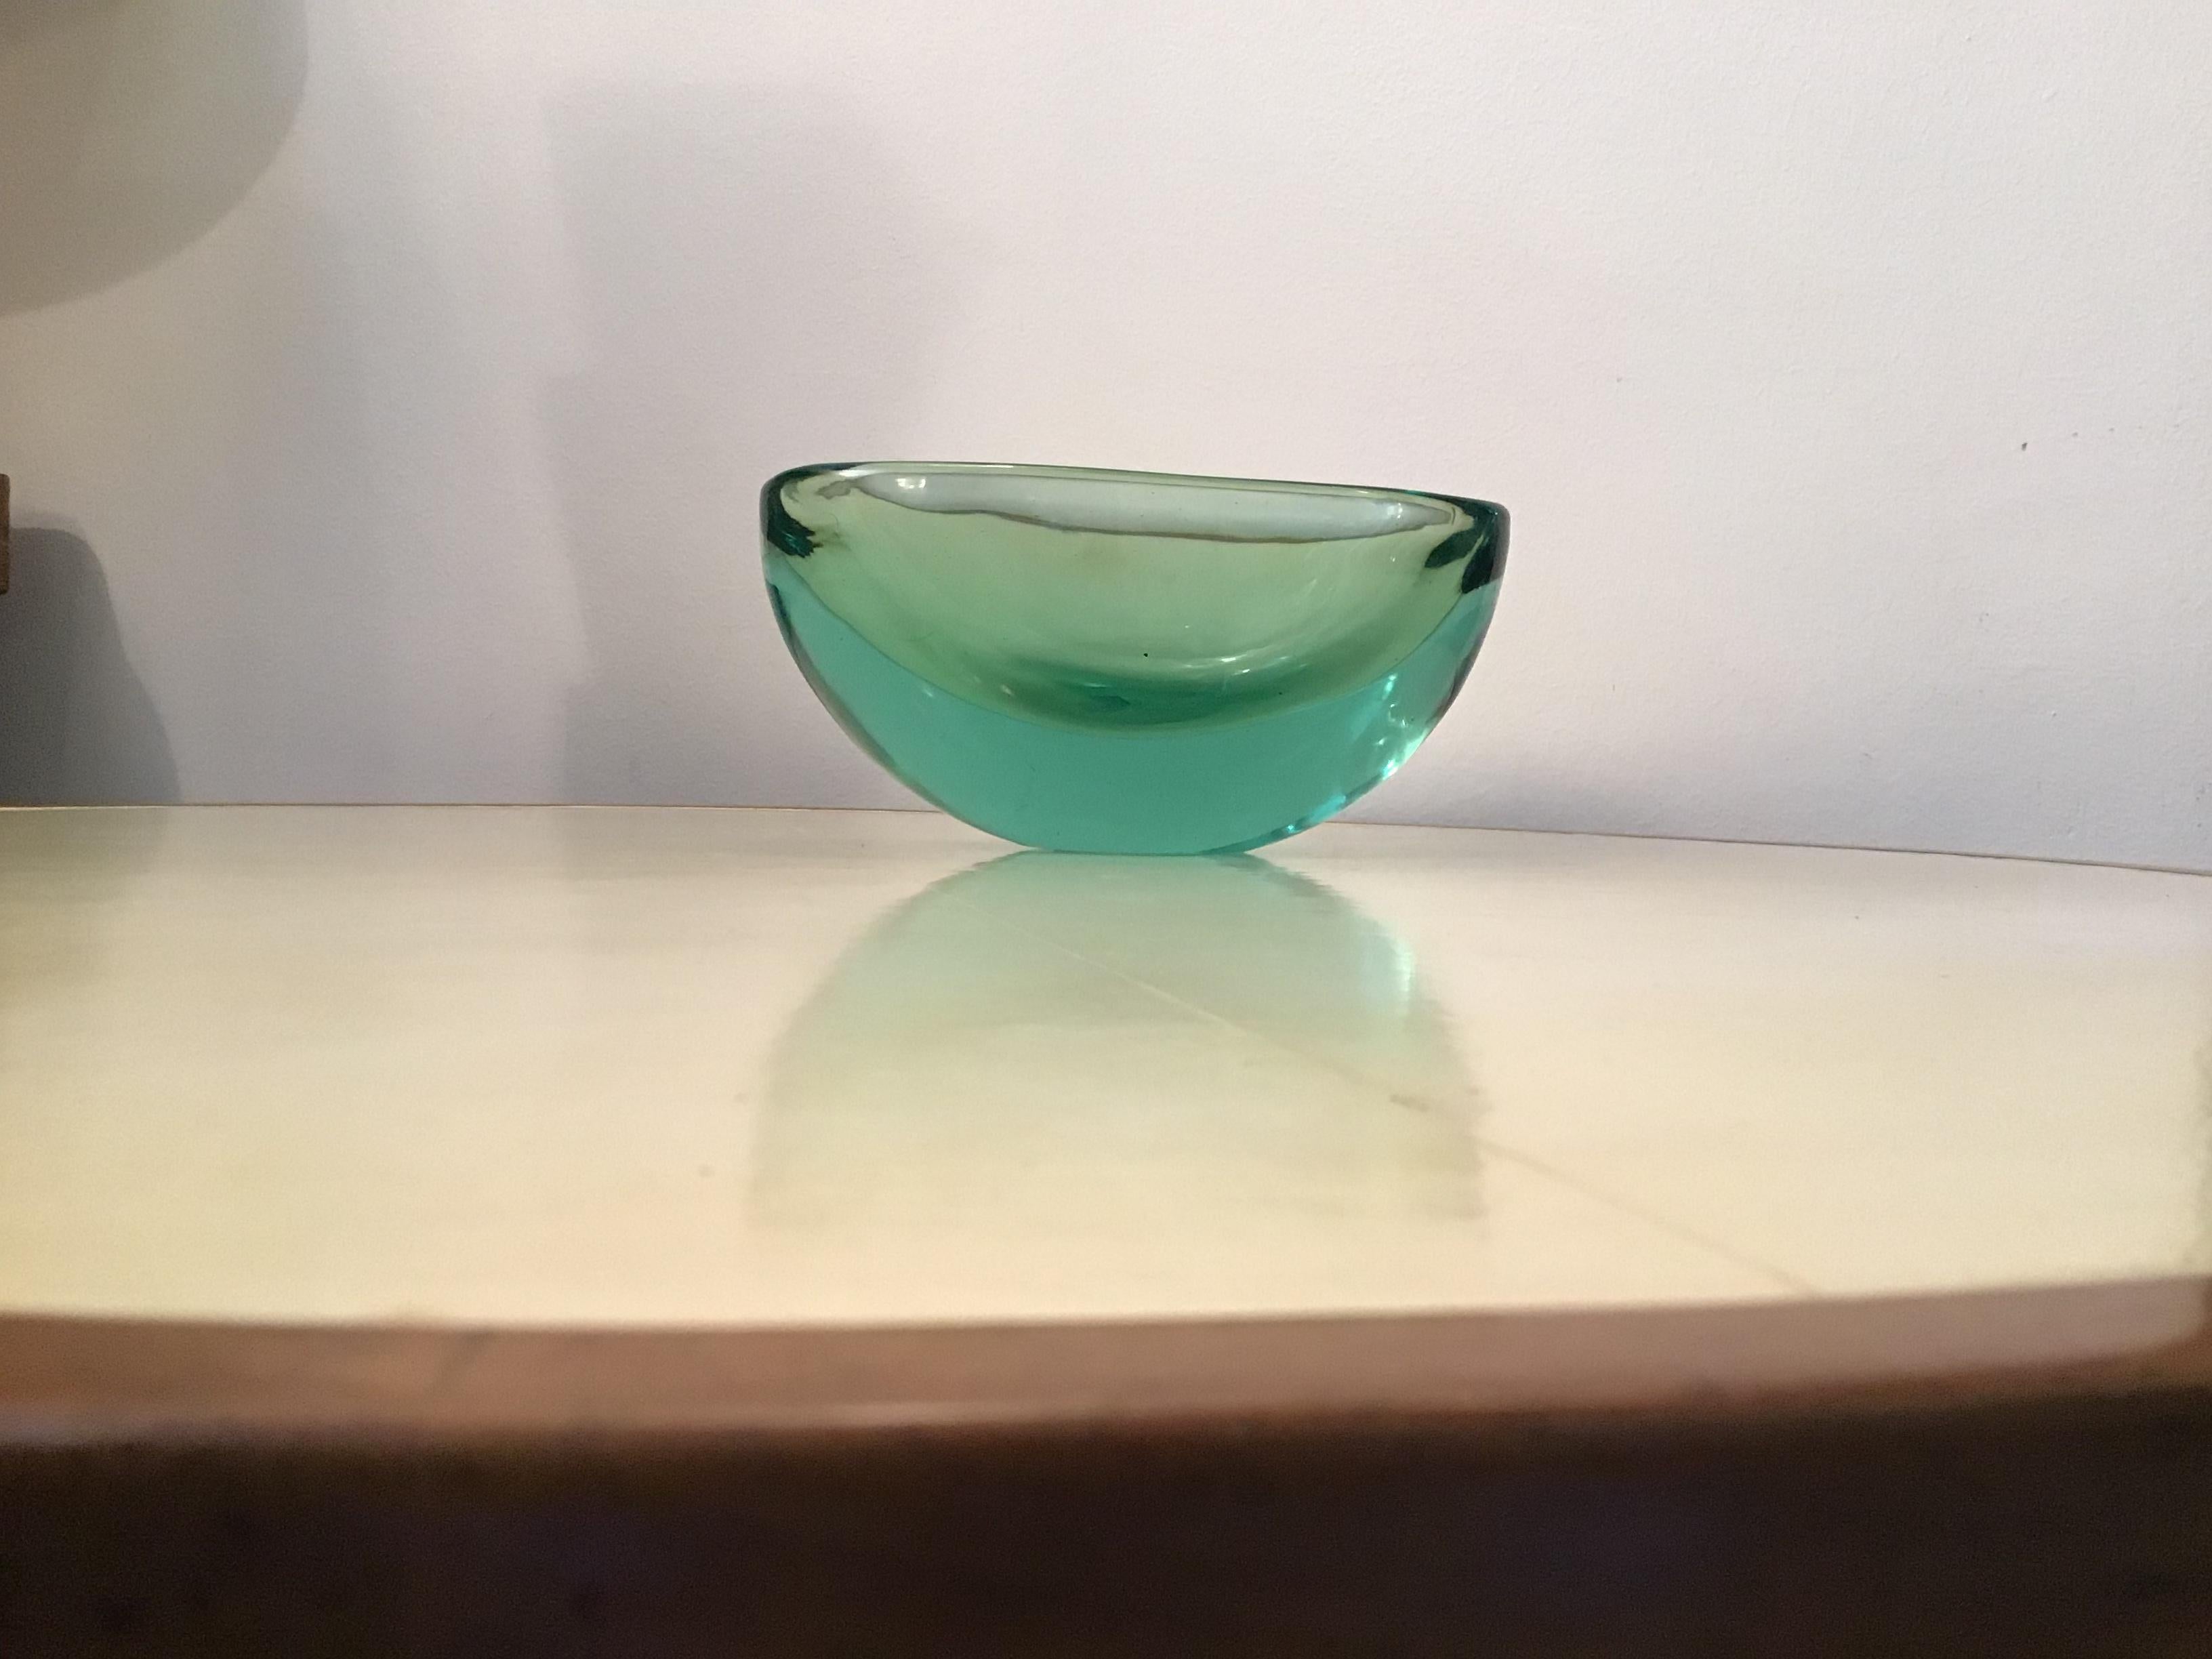 Archimede Seguso Oval Bowl, Green Submerged Glass Centrepiece, 1950 For Sale 6